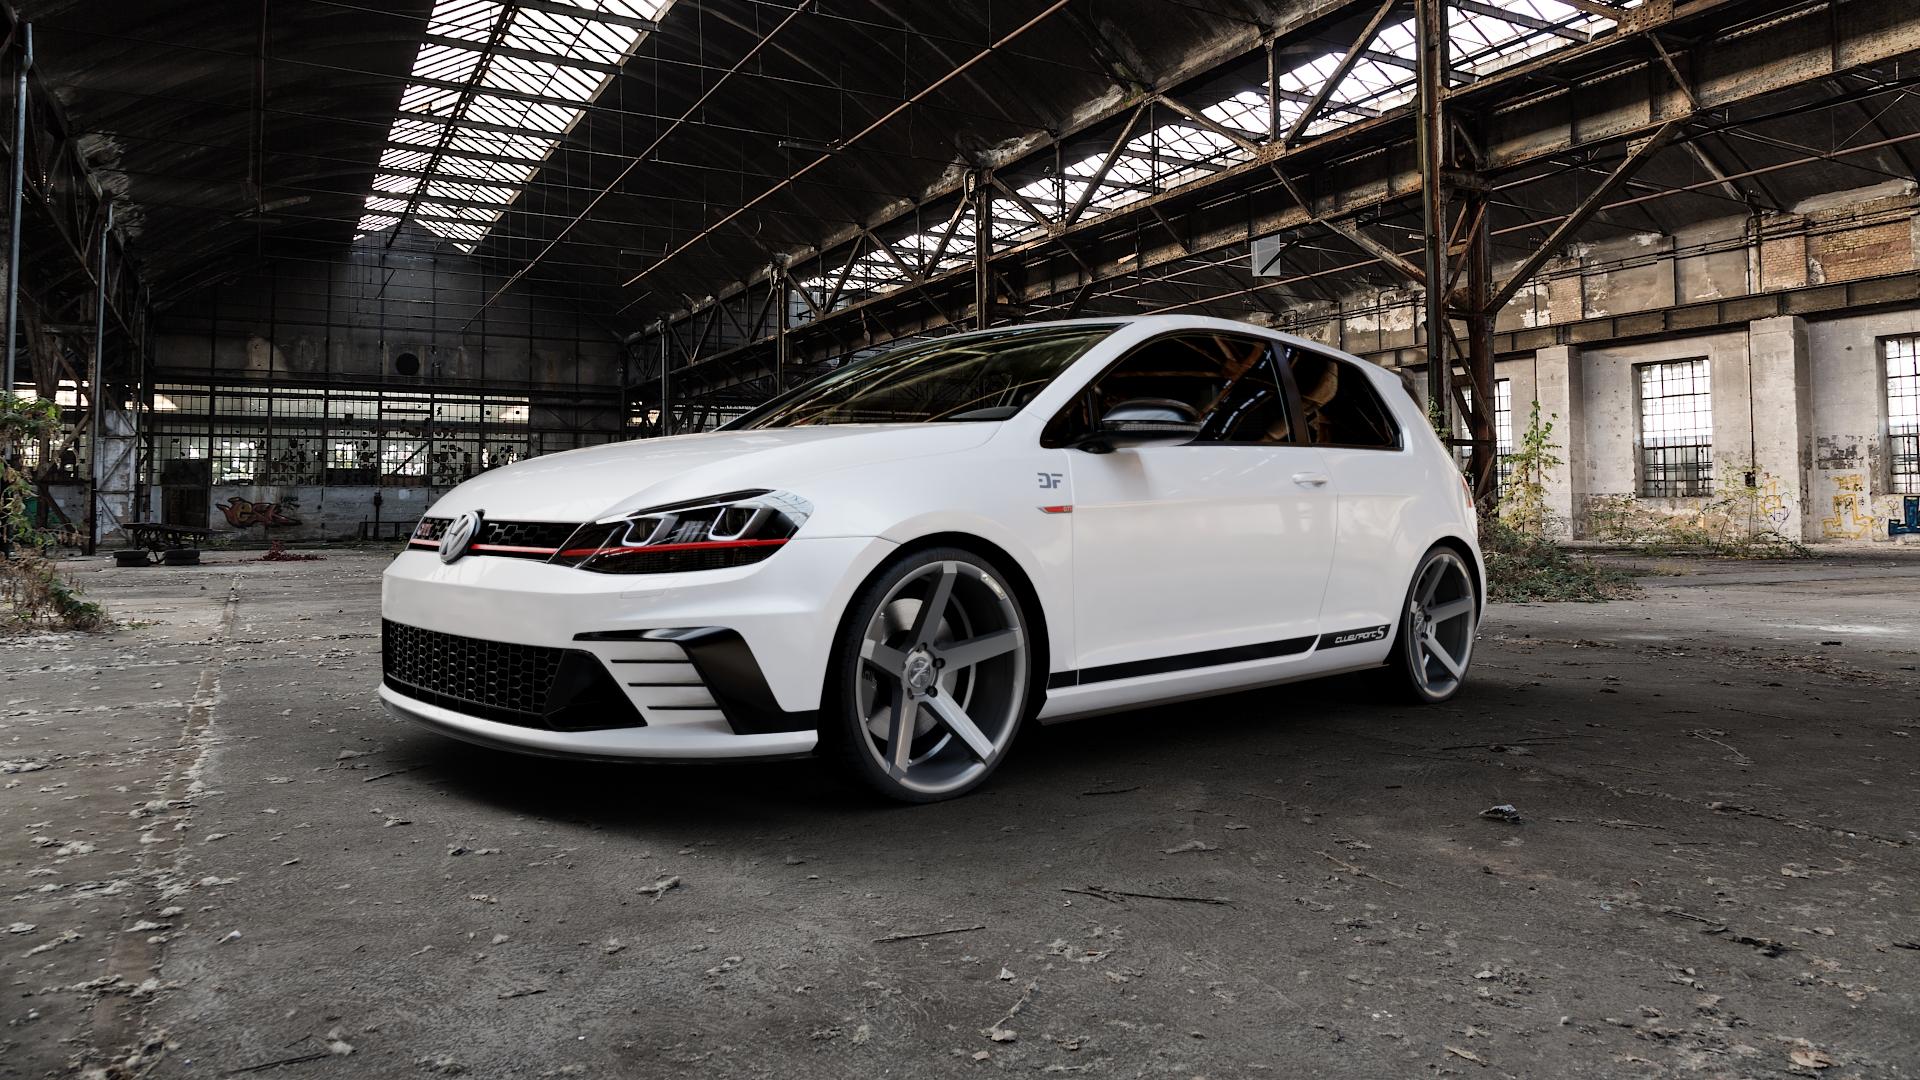 Volkswagen (VW) Golf 7 Facelift 1,0l TSI 85kW (116 hp) Wheels and Tyre  Packages | velonity.com